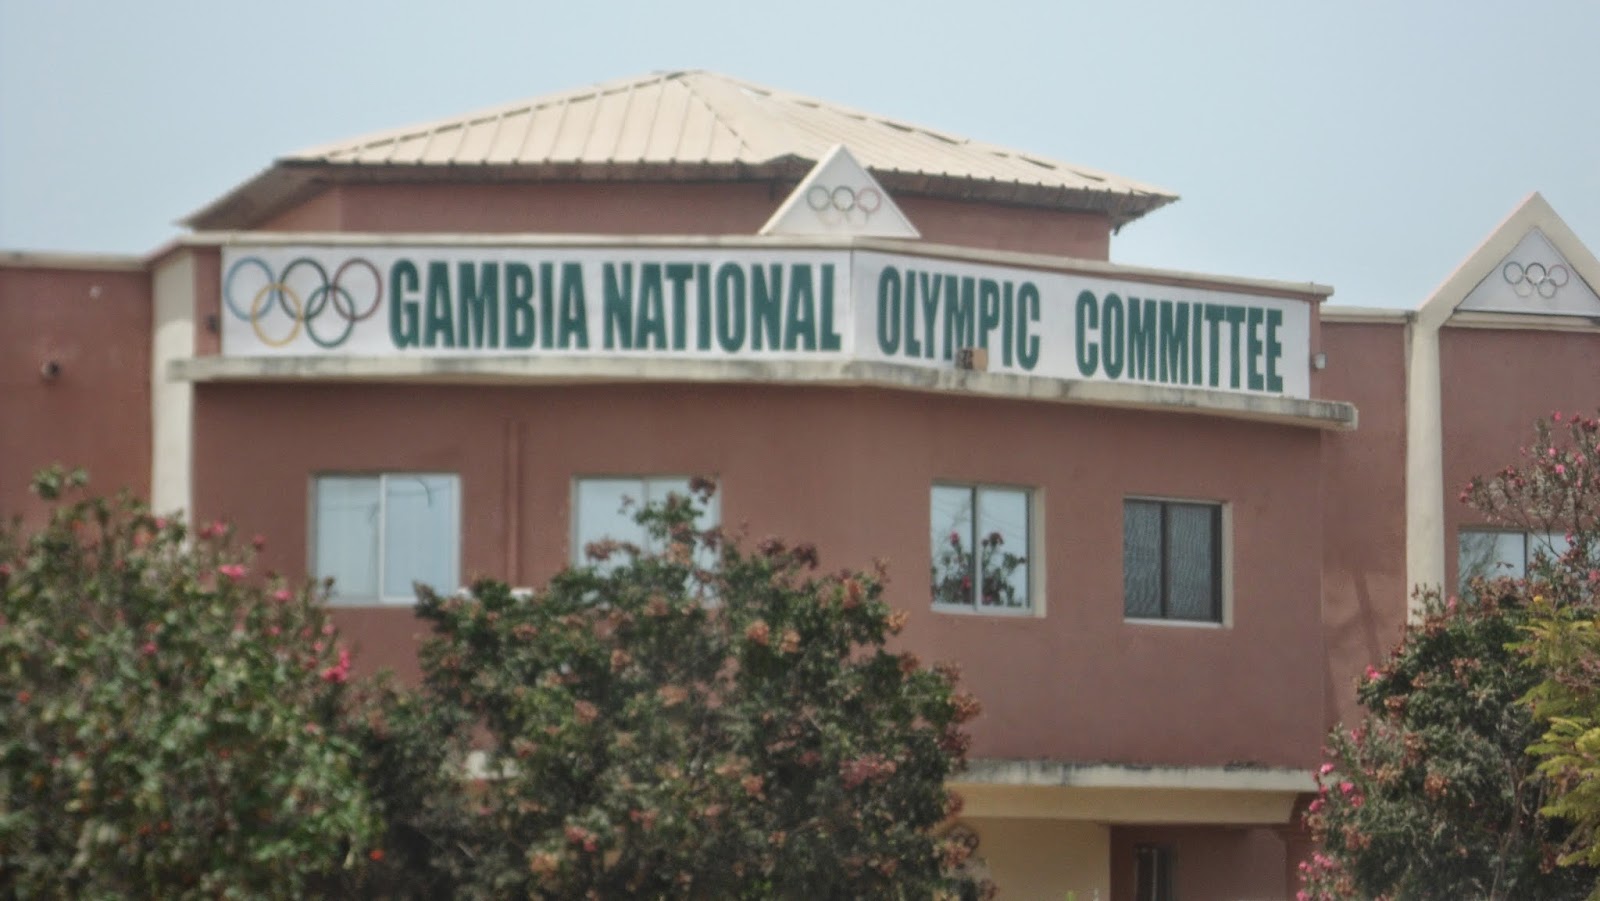 The Gambia National Olympic Committee have been promised that they will be able to move back into their headquarters after it was seized earlier this year by the Government ©GNOC